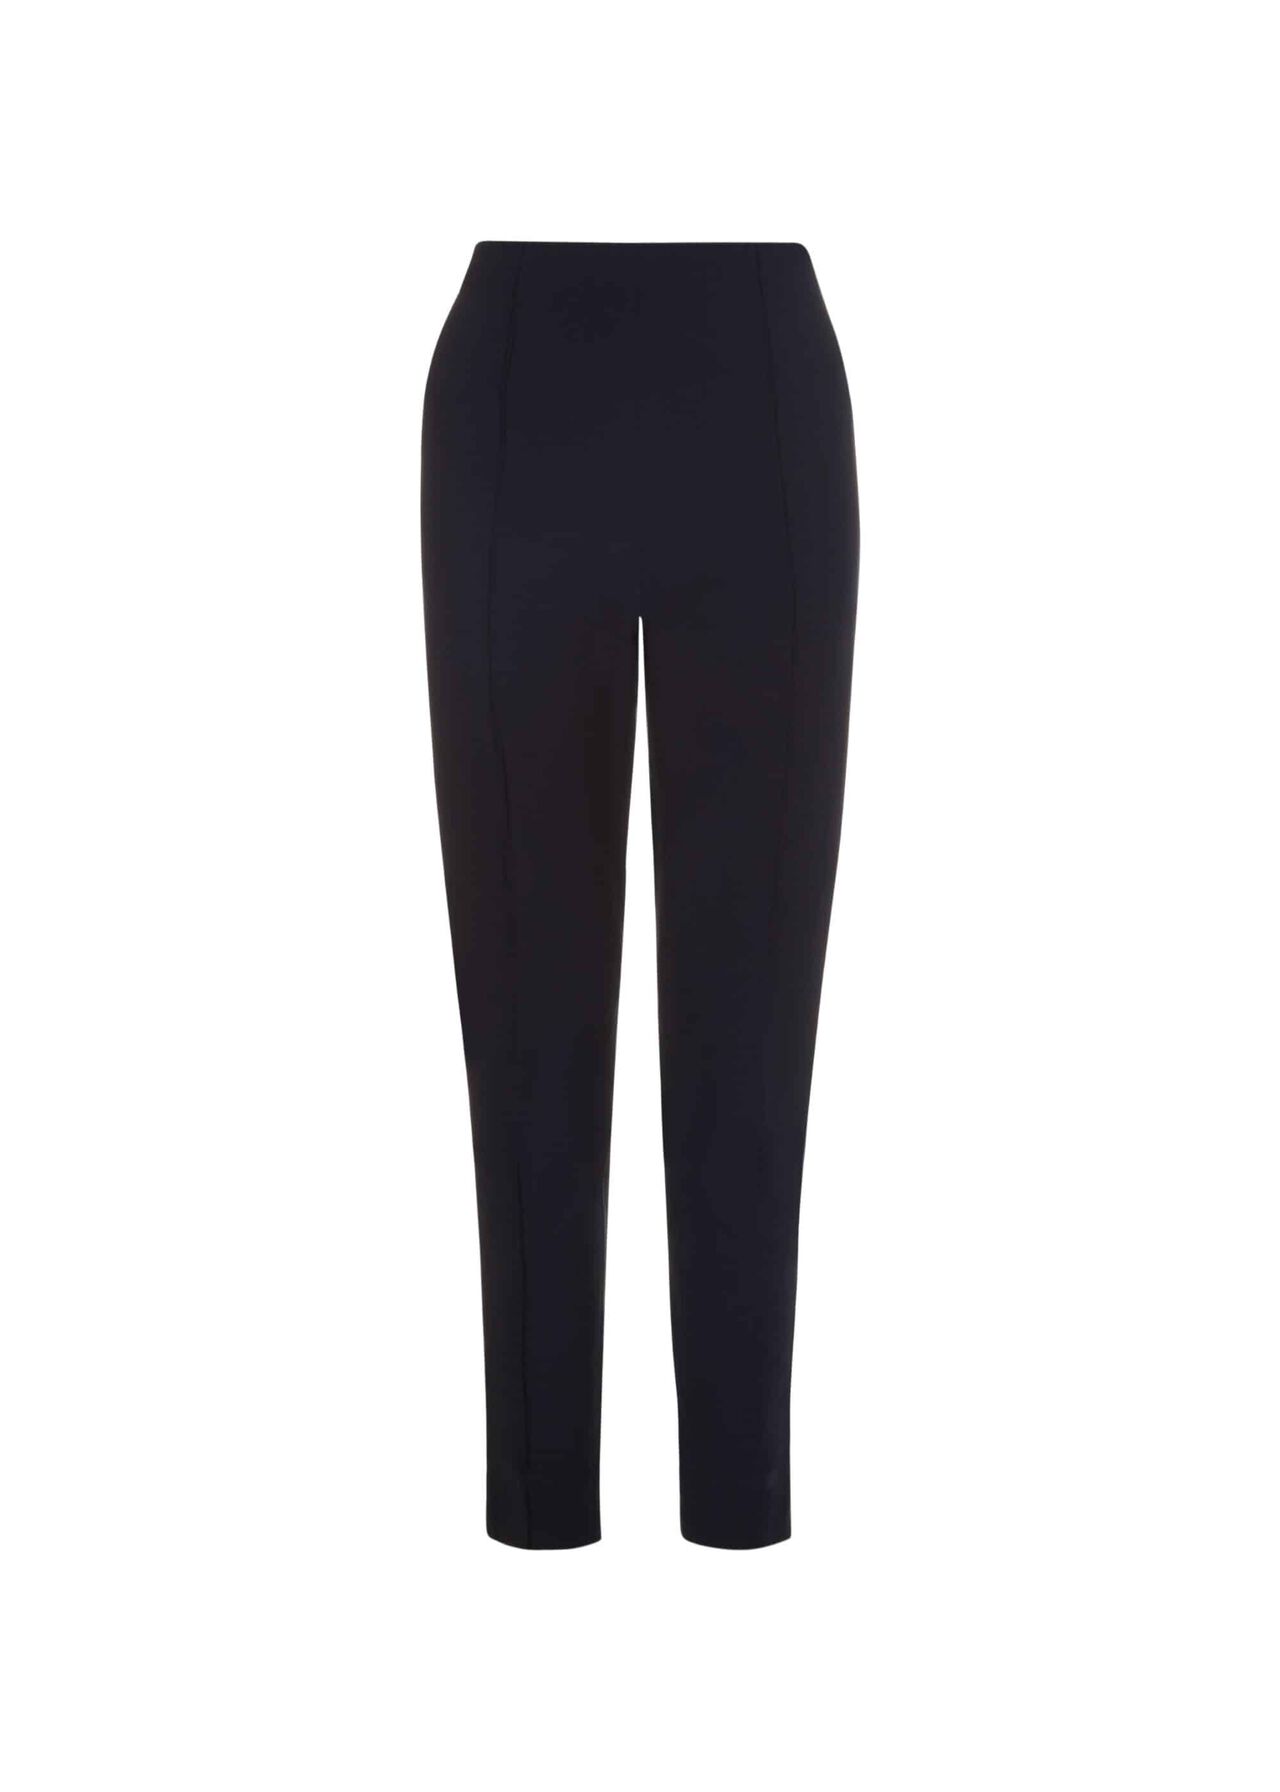 Adrianna Pants With Stretch, Navy, hi-res